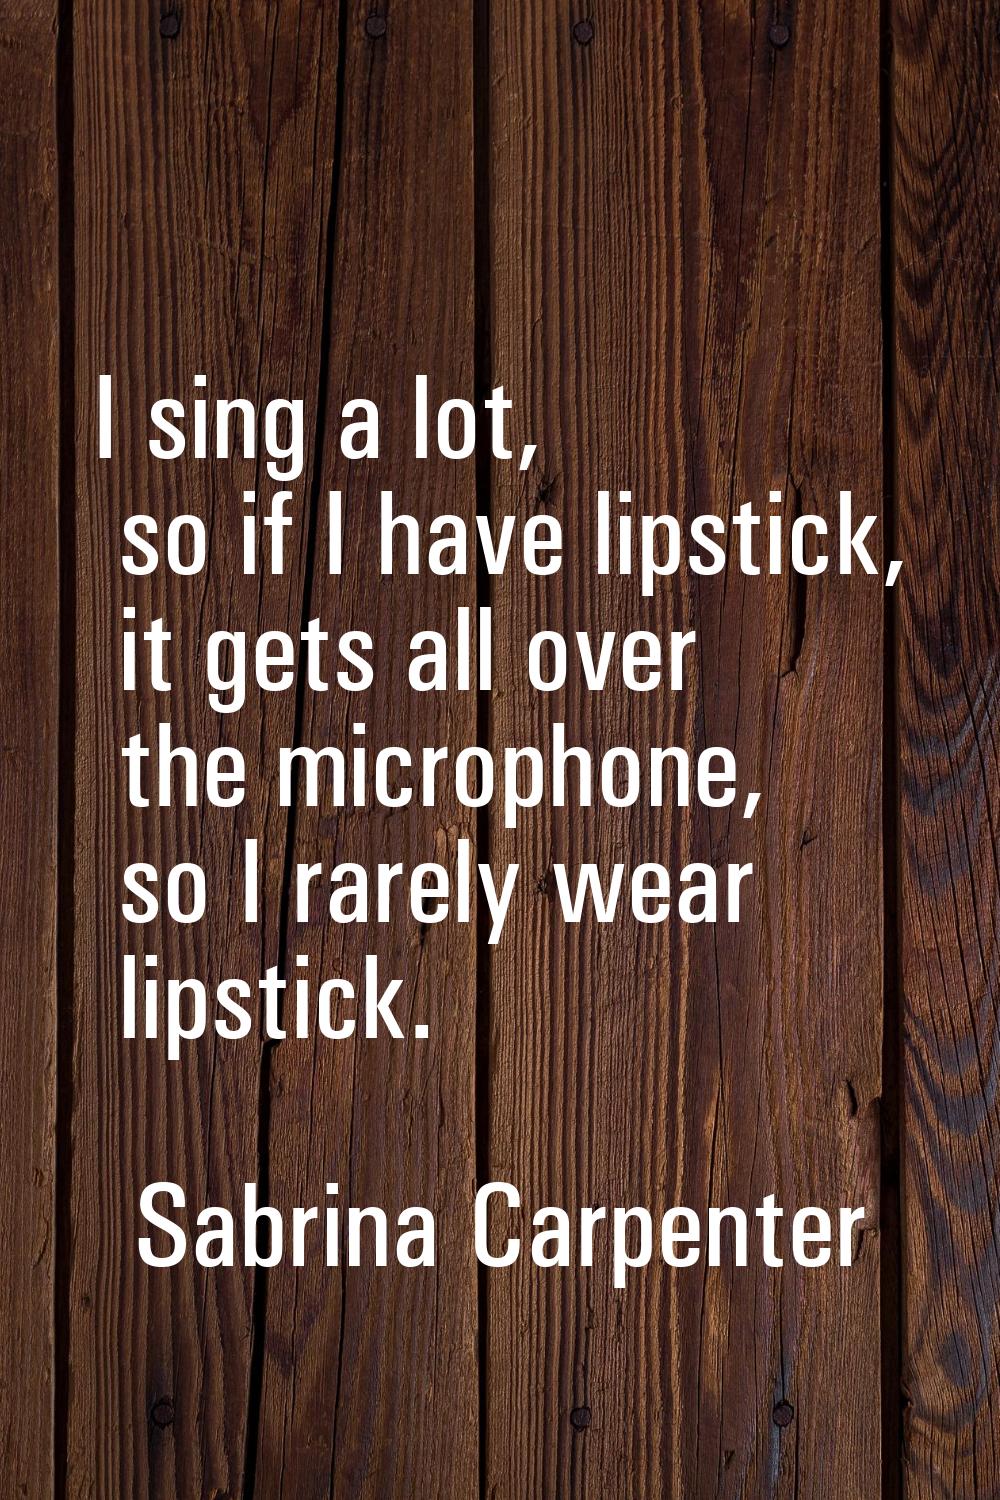 I sing a lot, so if I have lipstick, it gets all over the microphone, so I rarely wear lipstick.